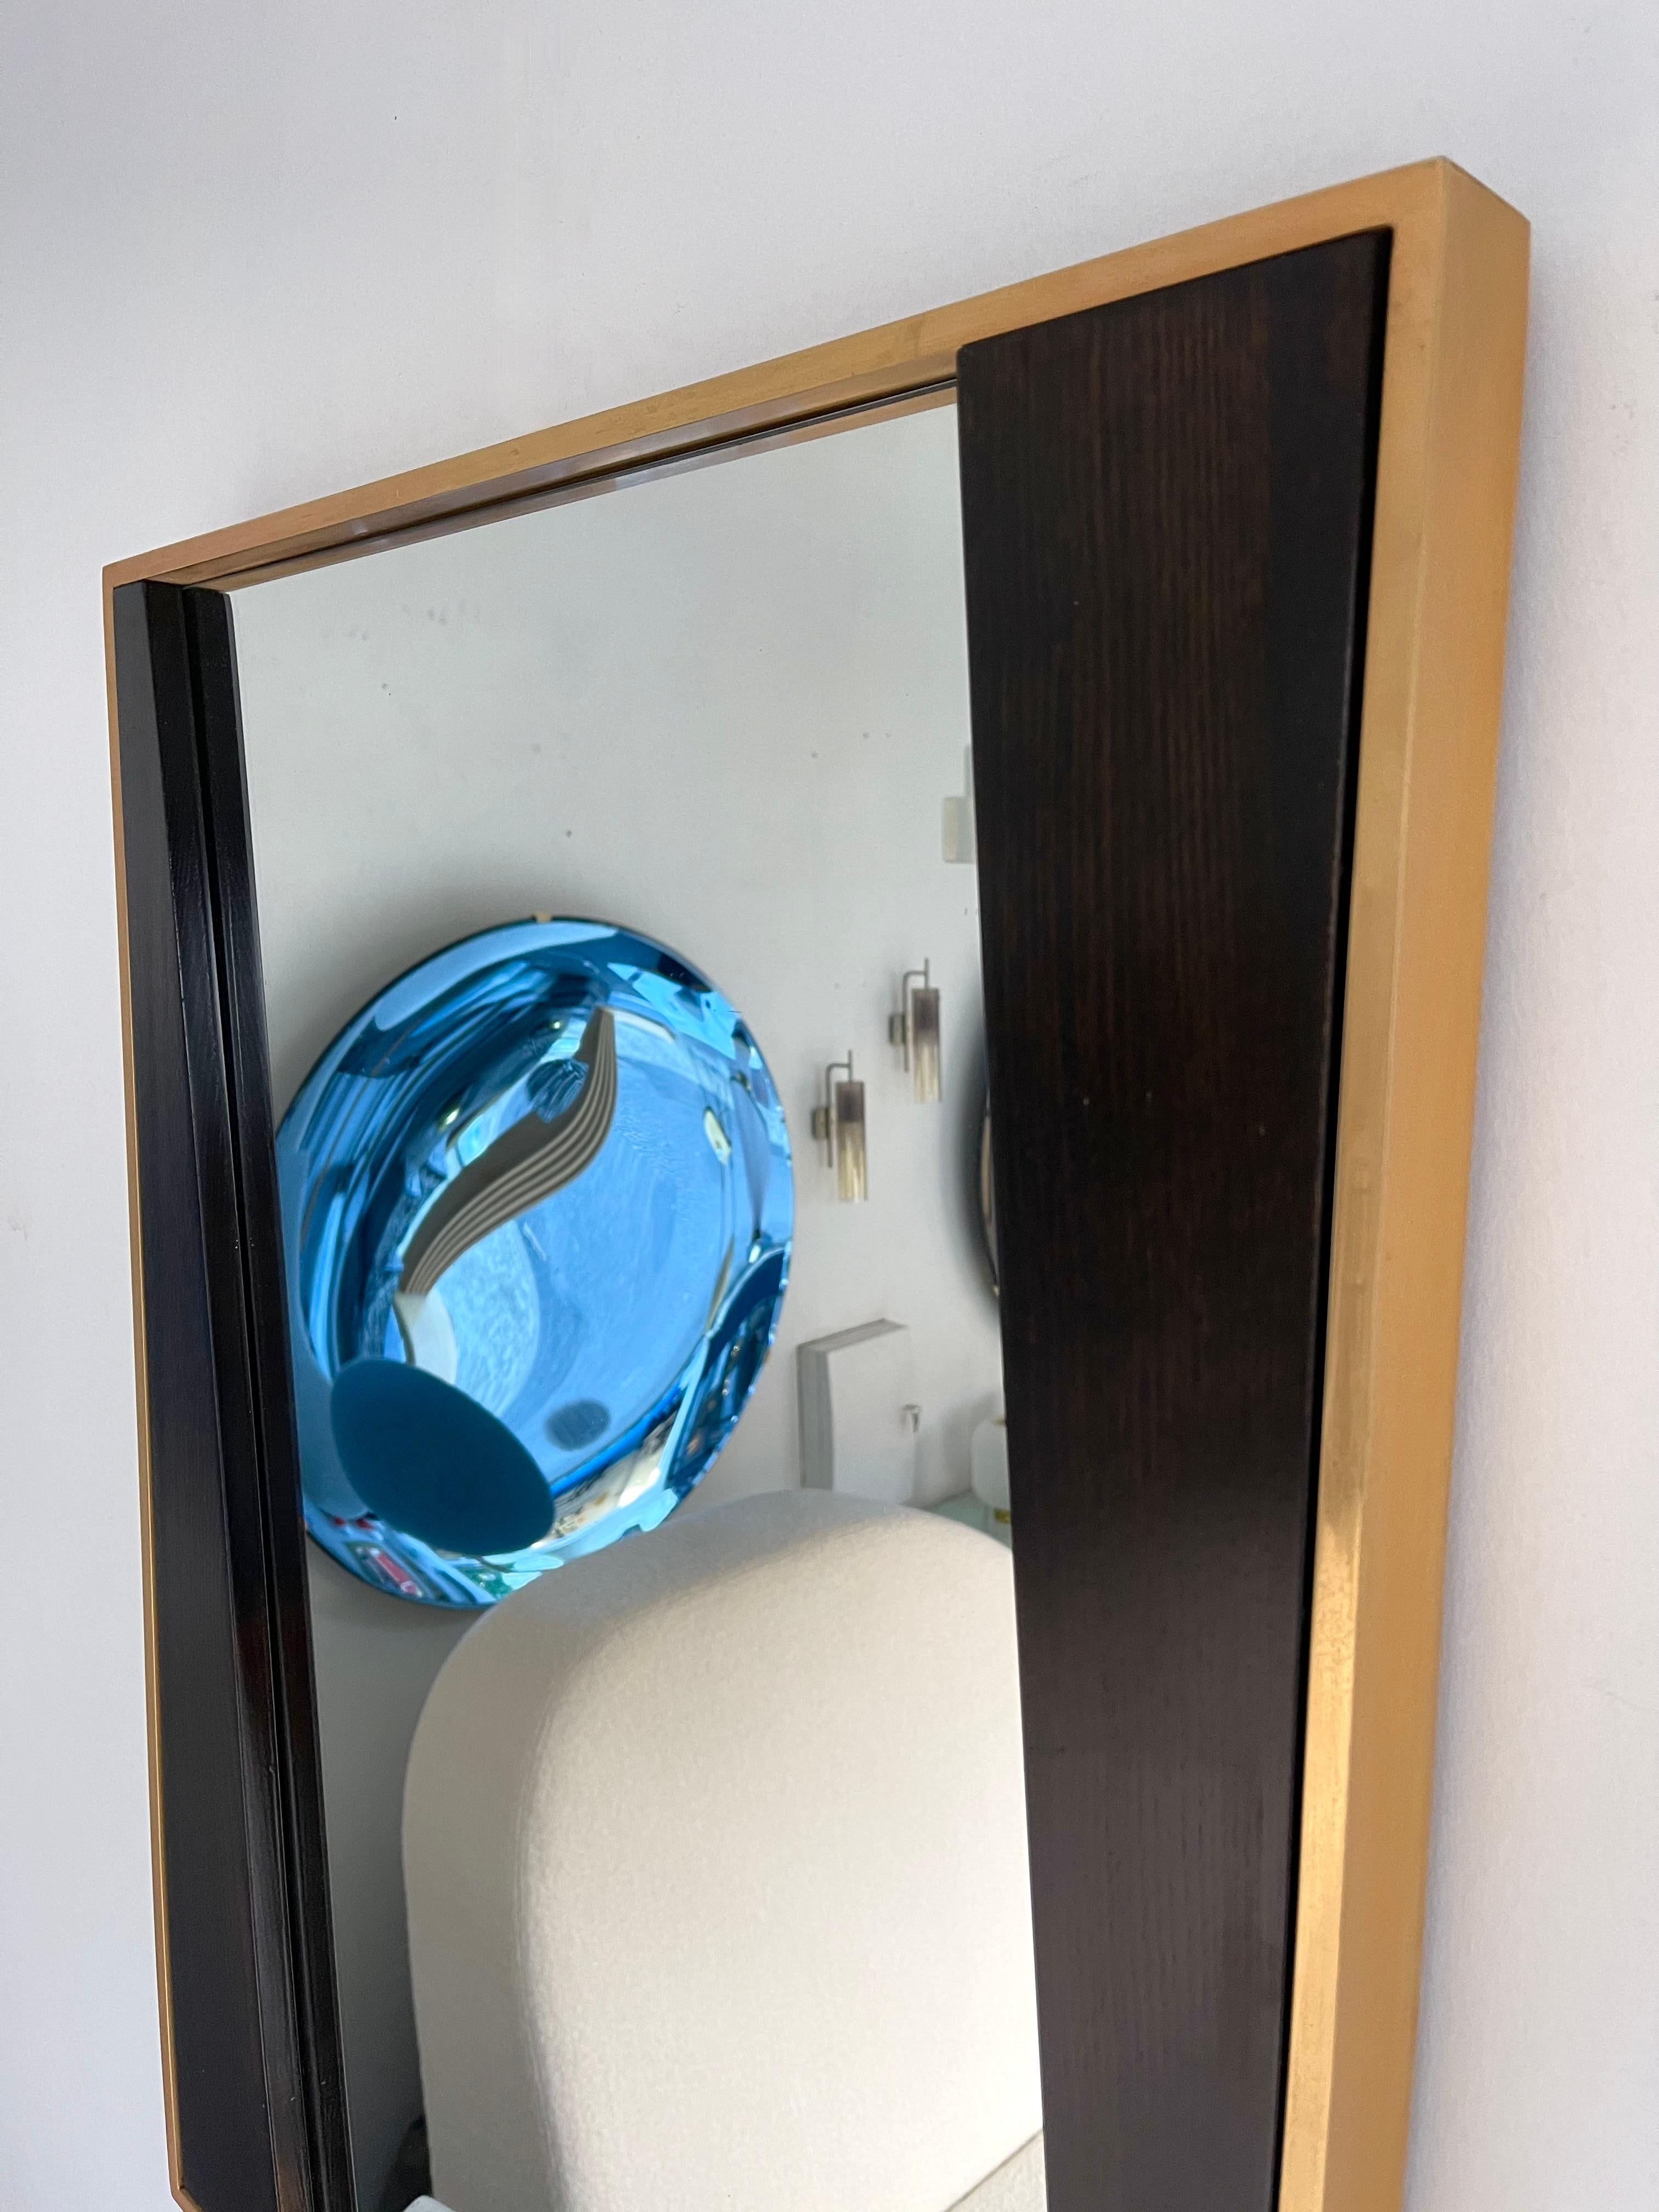 Italian Geometrical Wood and Brass Mirror, Italy, 1970s For Sale